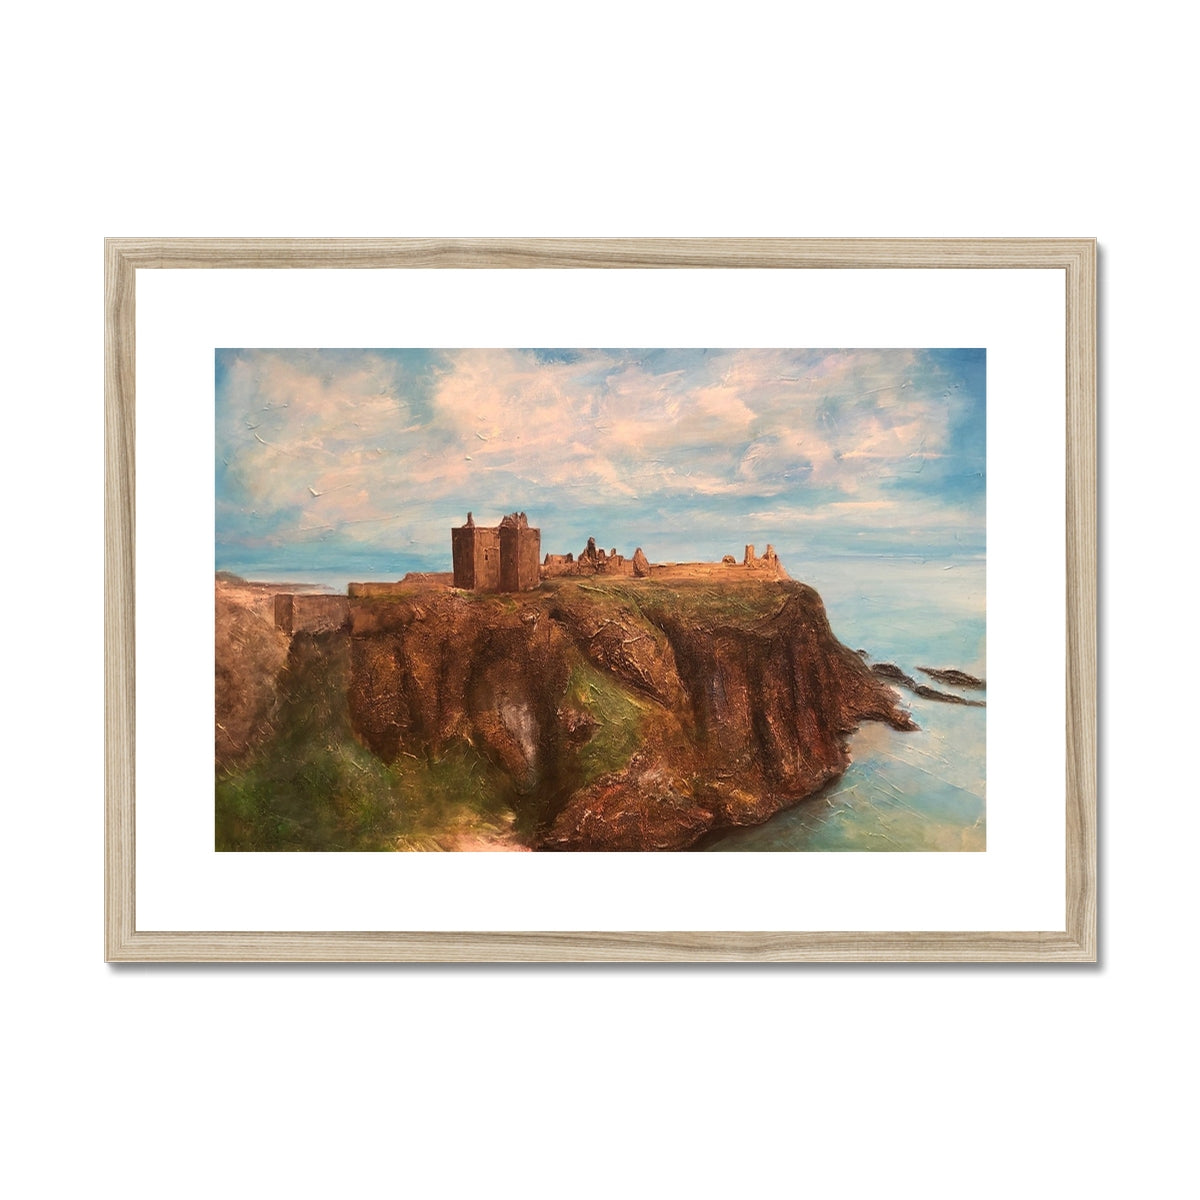 Dunnottar Castle Painting | Framed & Mounted Prints From Scotland-Framed & Mounted Prints-Historic & Iconic Scotland Art Gallery-A2 Landscape-Natural Frame-Paintings, Prints, Homeware, Art Gifts From Scotland By Scottish Artist Kevin Hunter